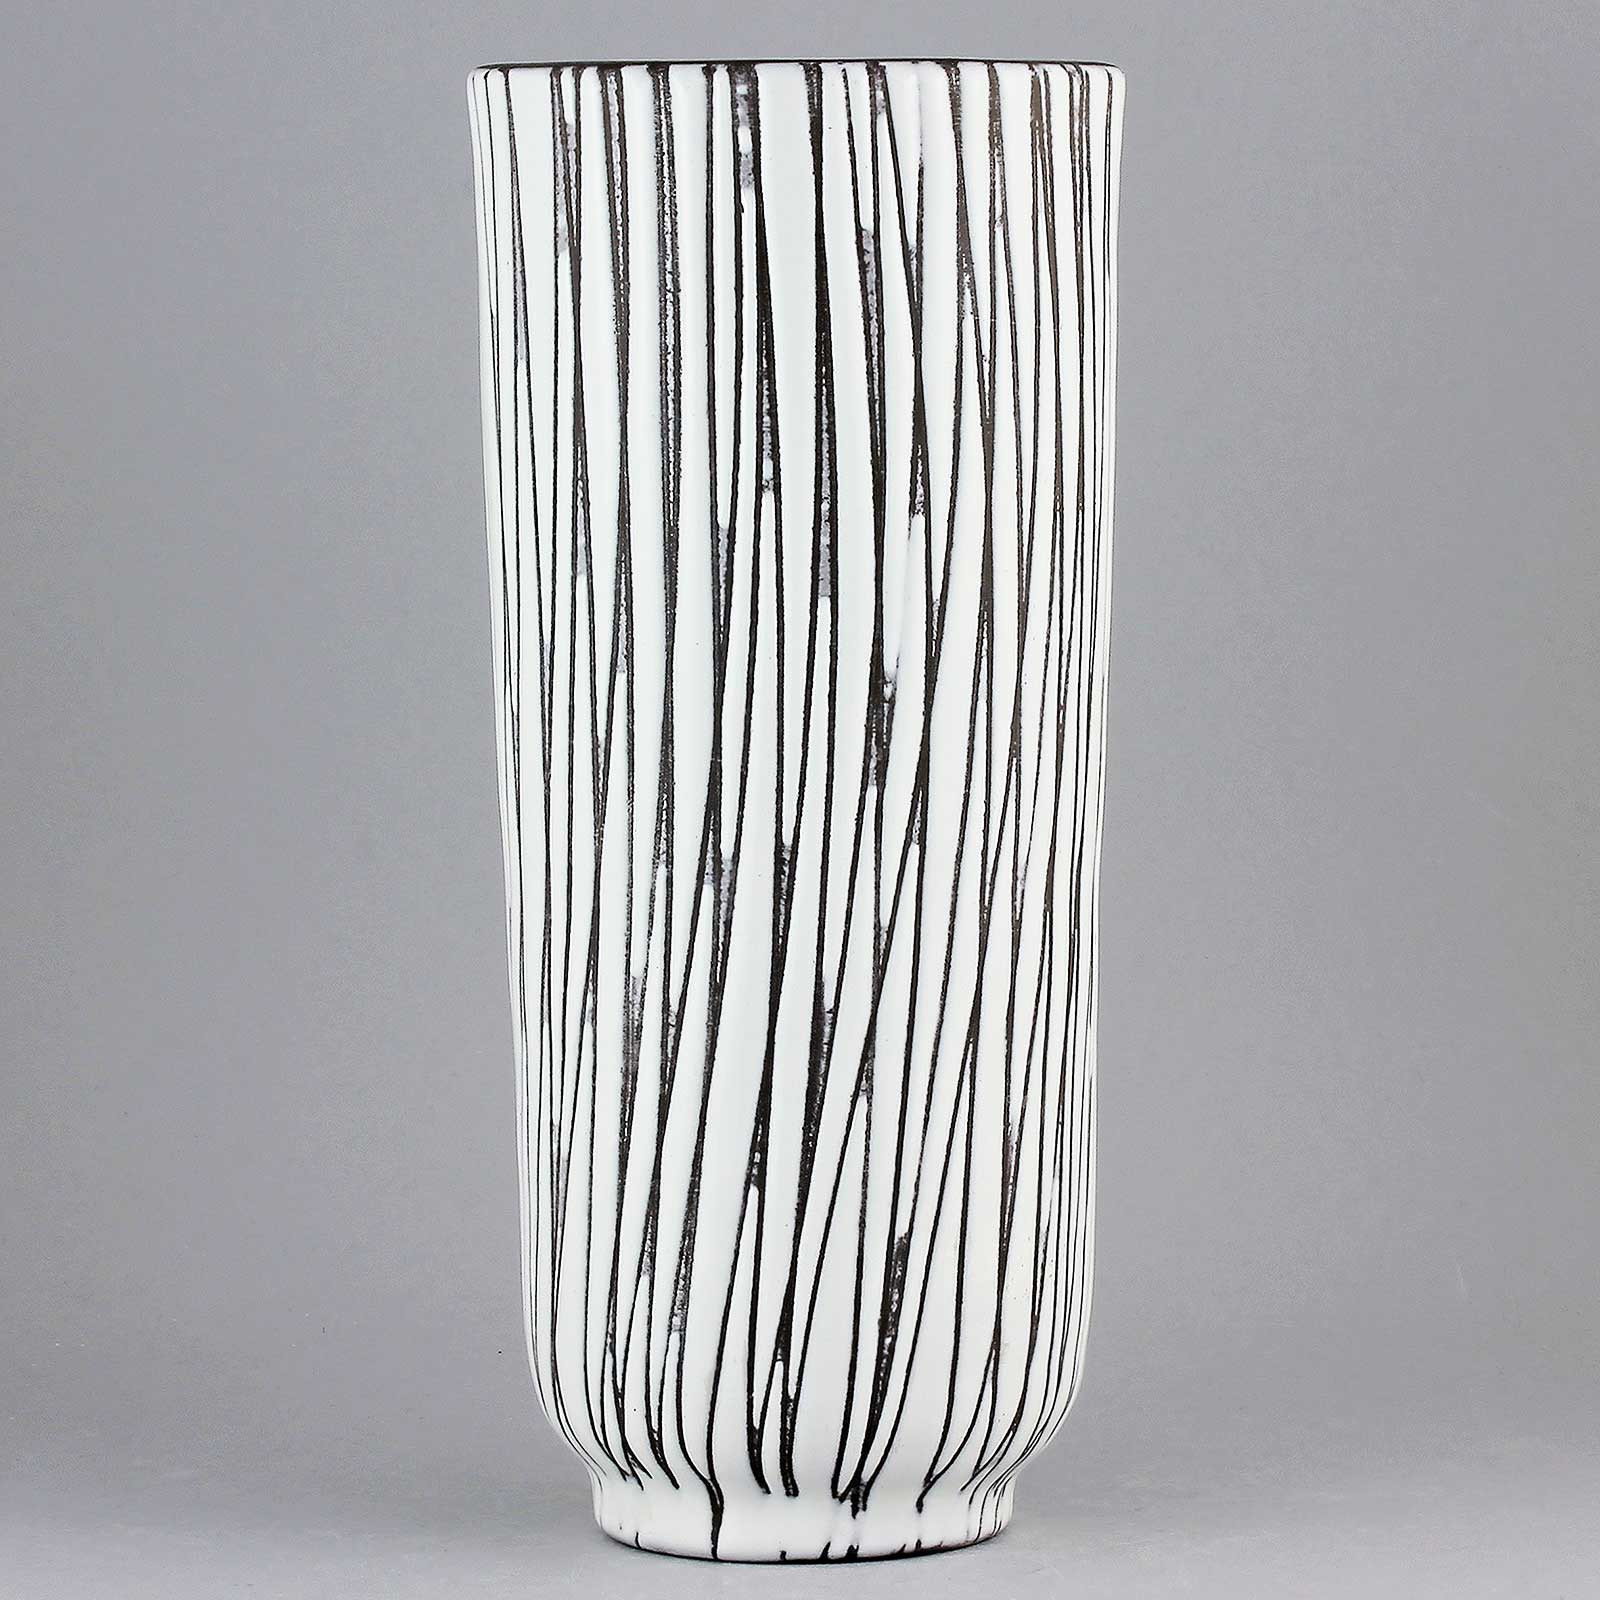 28 Trendy 20 Inch Cylinder Vases 2024 free download 20 inch cylinder vases of mari simmulson mars 1952 striking cylinder vase with regard to 160825699 origpic e7f23b